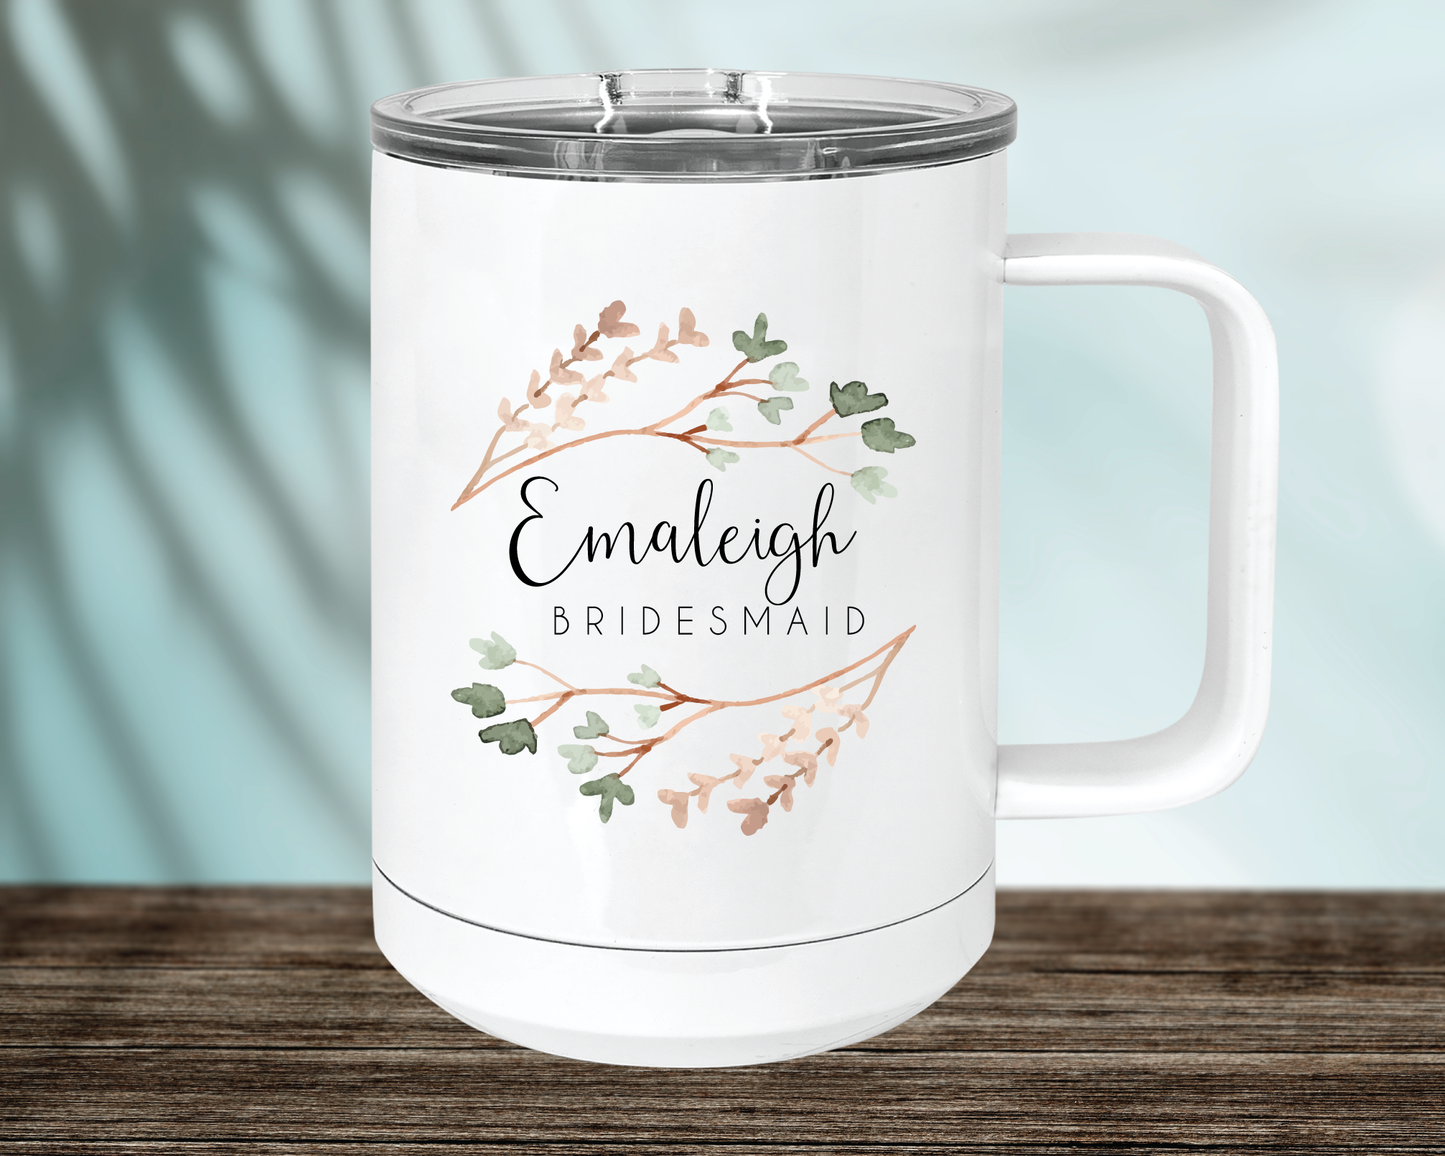 Personalized Bridesmaid Mug - 15 oz white stainless steel with handle